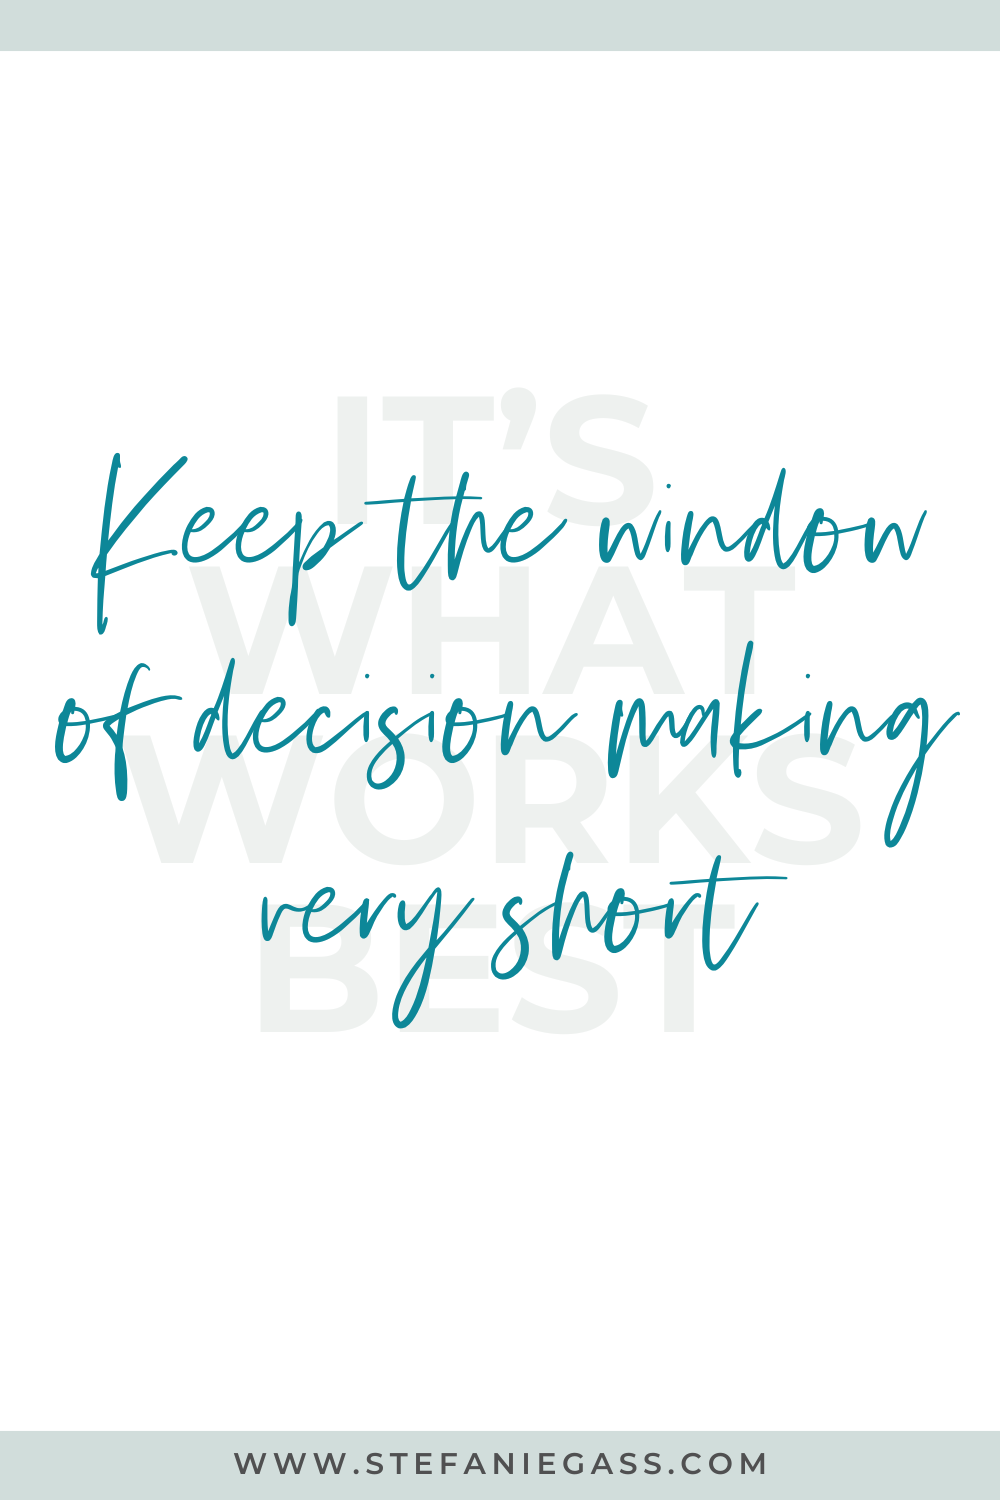 Text says " Keep the window of decision making very short it's what works.